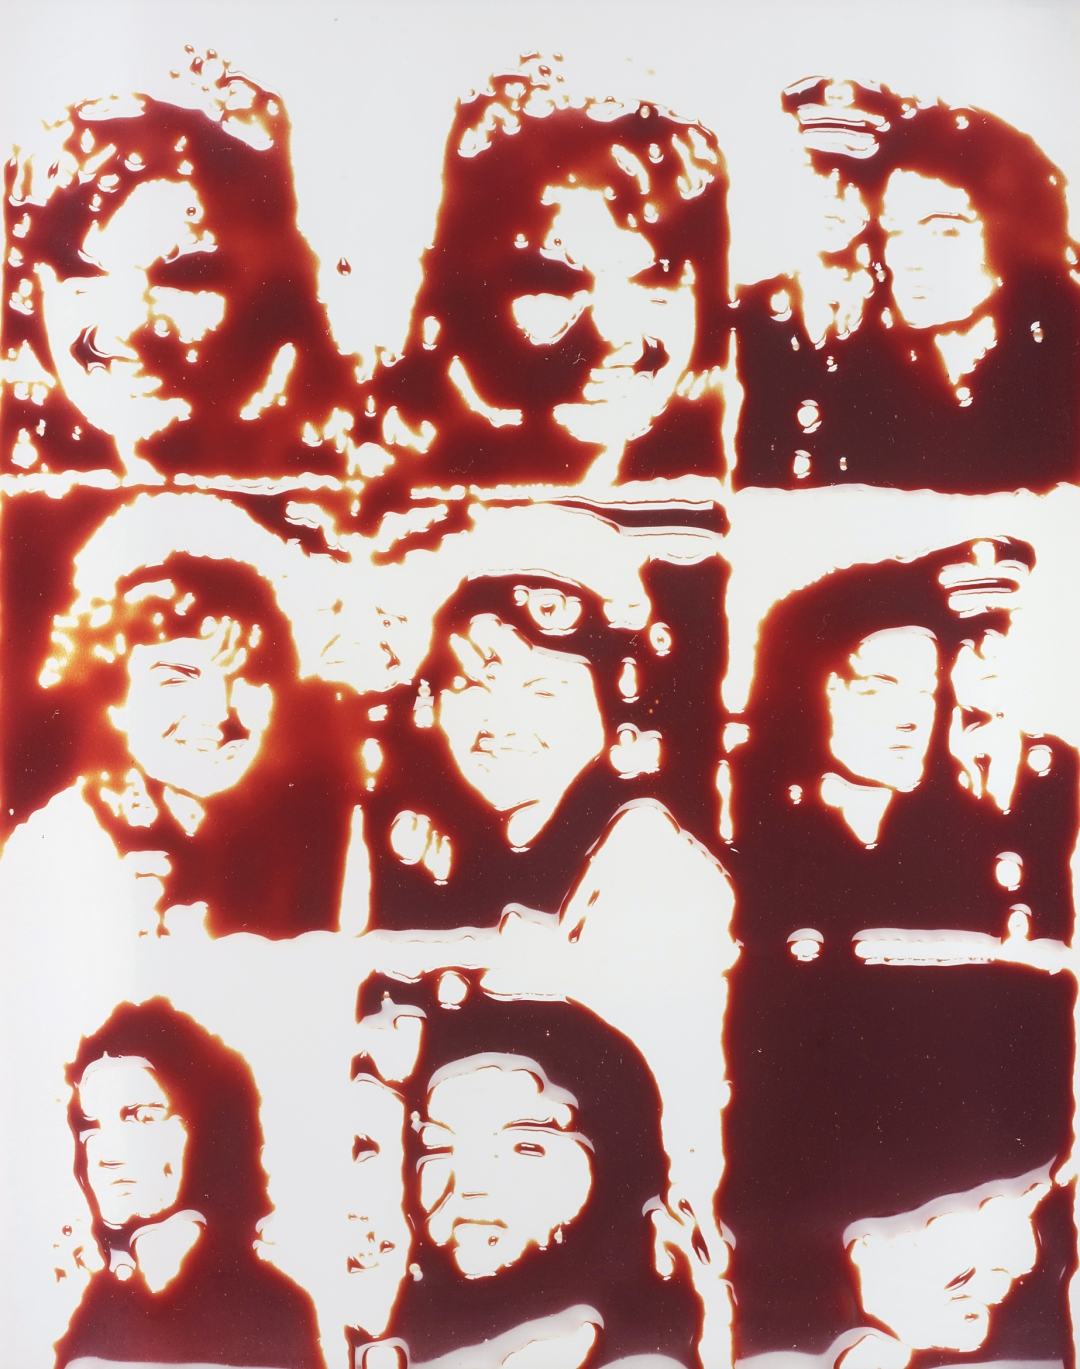 Vik Muniz, <i>Jackie (from Pictures of Chocolate)</i>, 2001, Cibachrome print, 62 1/4 x 49 1/4 in. (158 x 125 cm), Numbered 2 of 3 artist's proof, Available